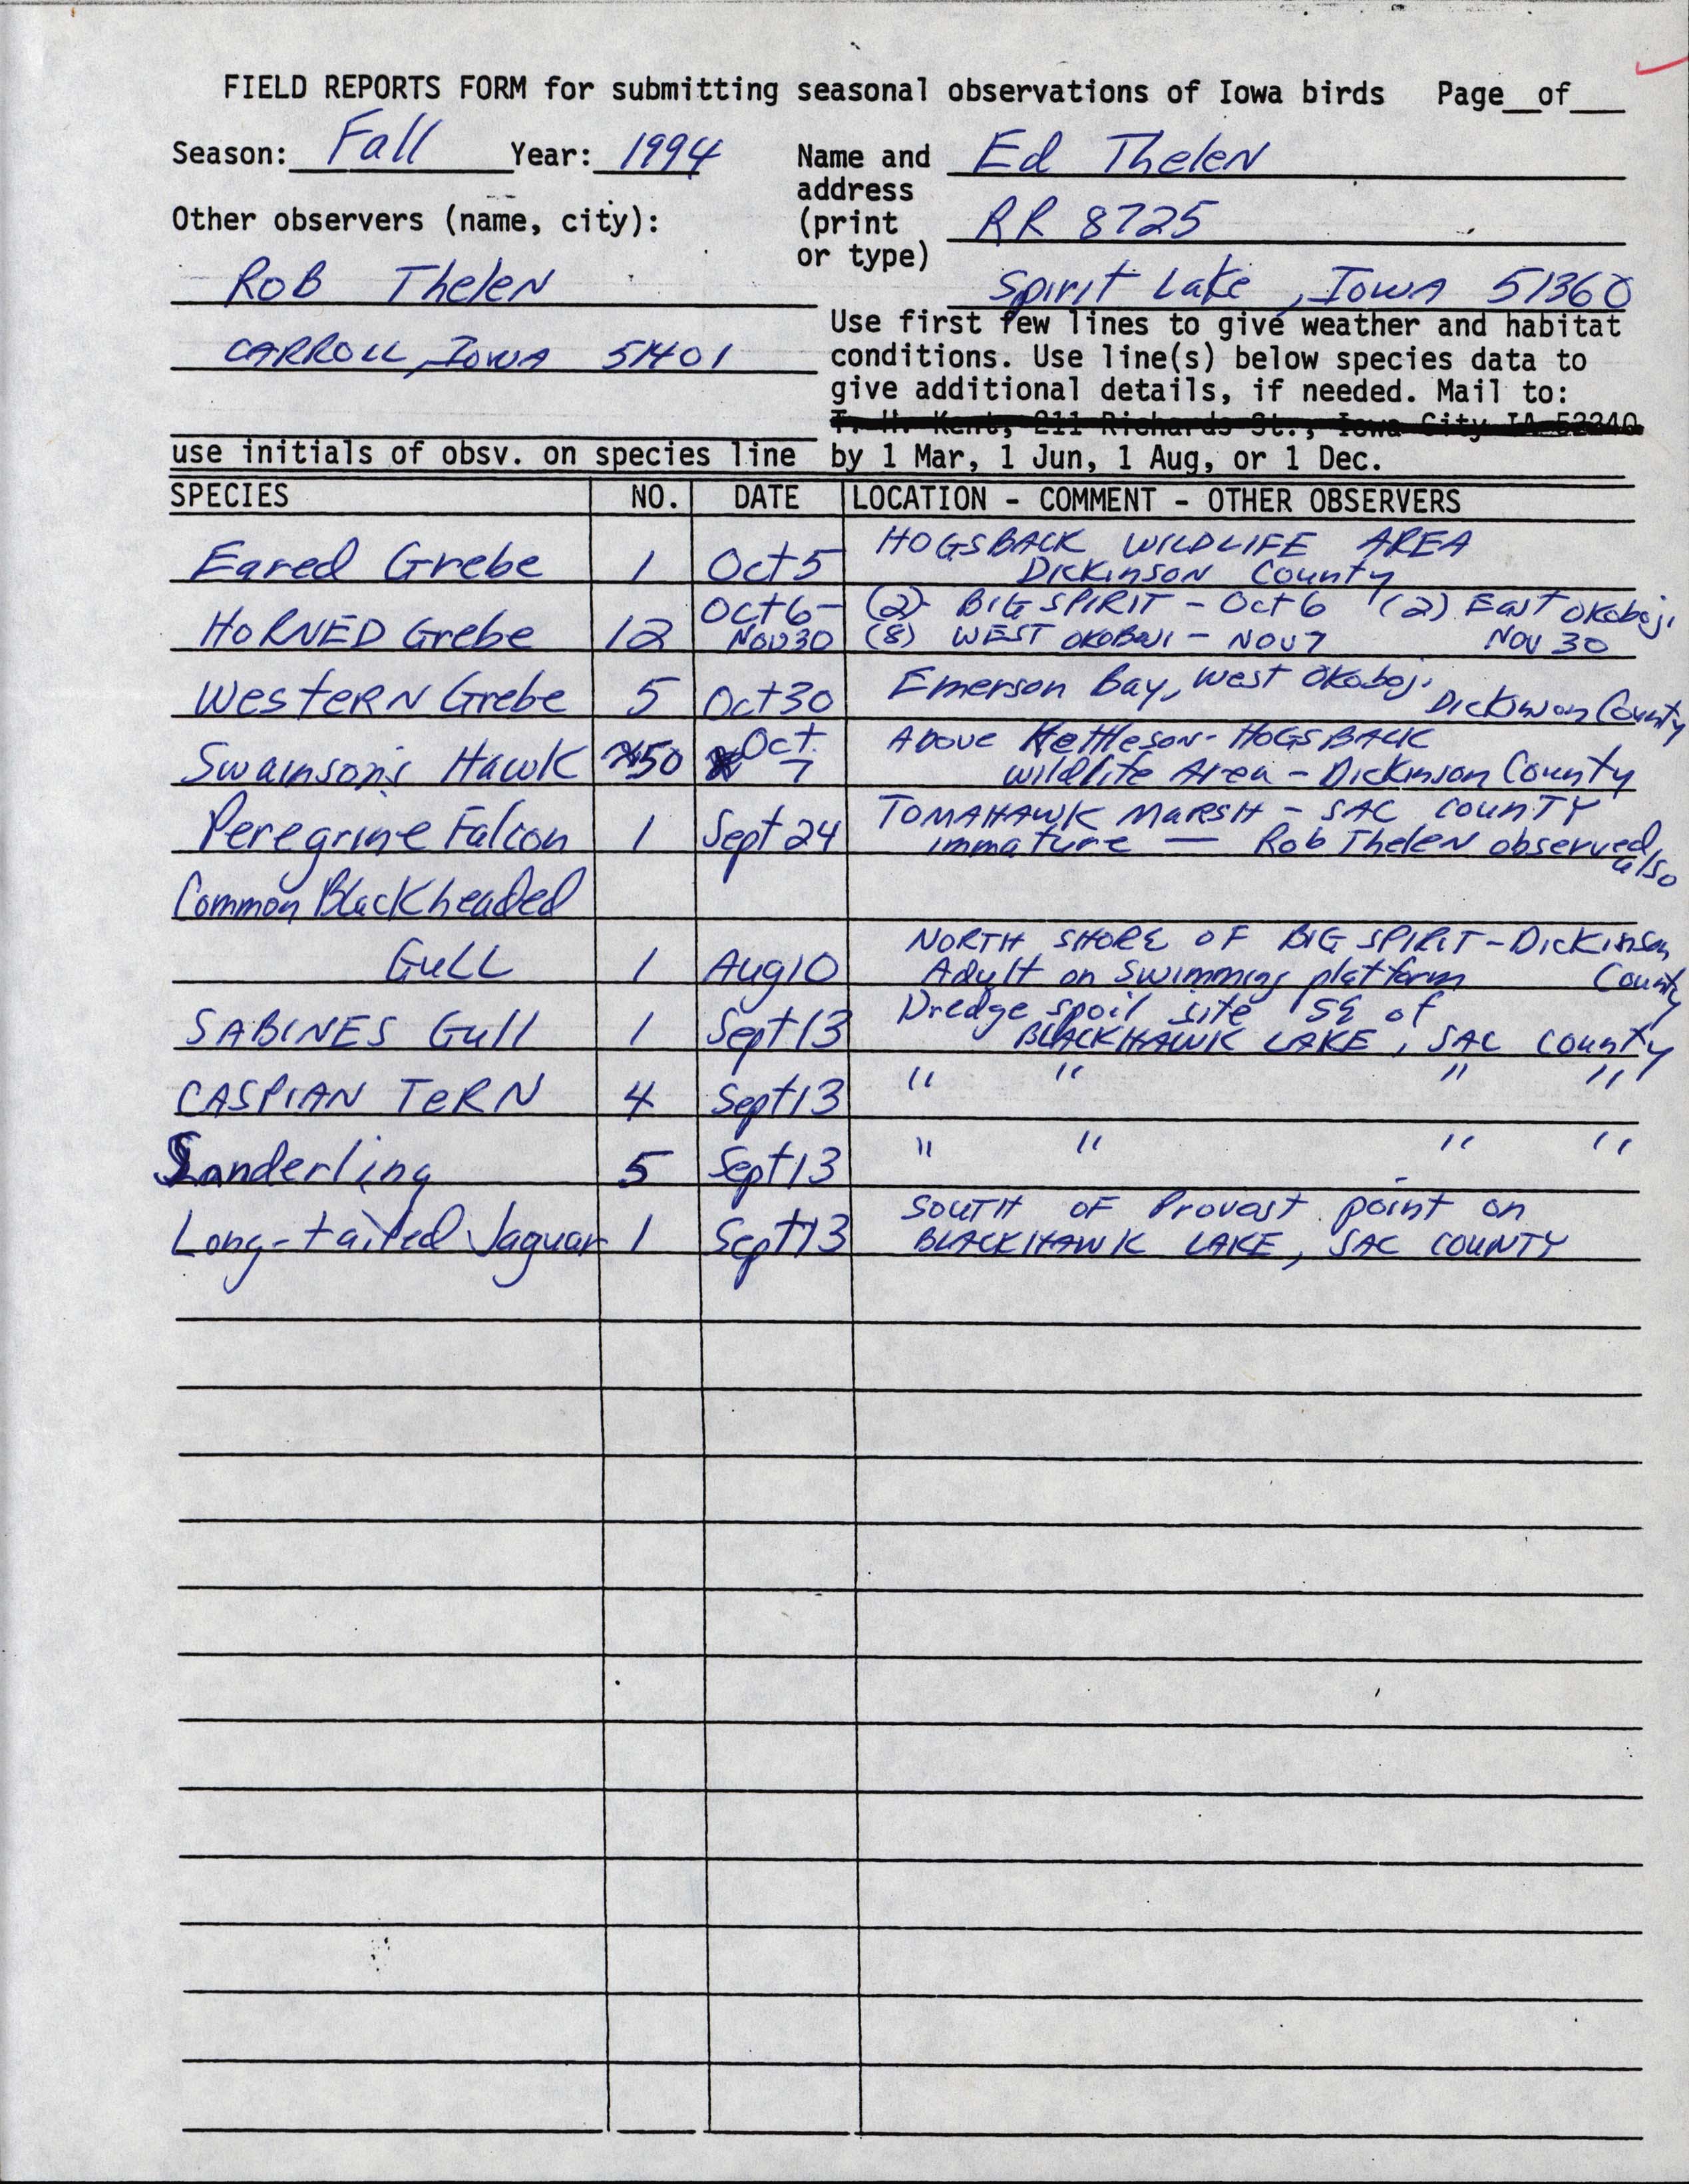 Field reports form for submitting seasonal observations of Iowa birds, Ed Thelen, fall 1994